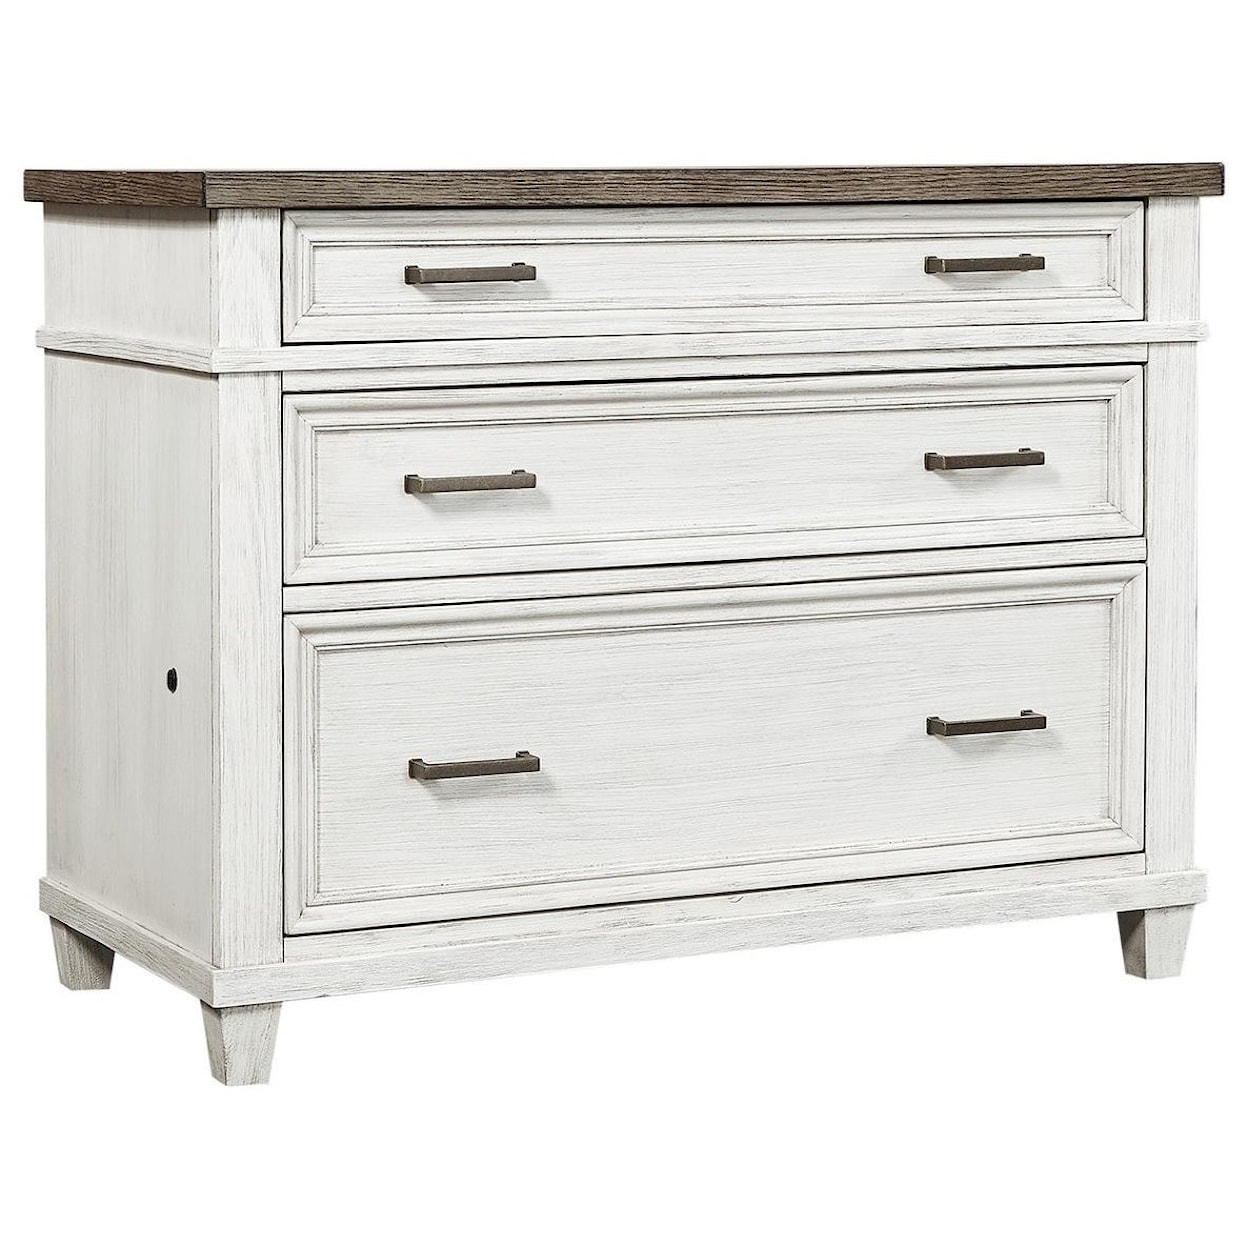 Aspenhome Caraway Lateral File Cabinet